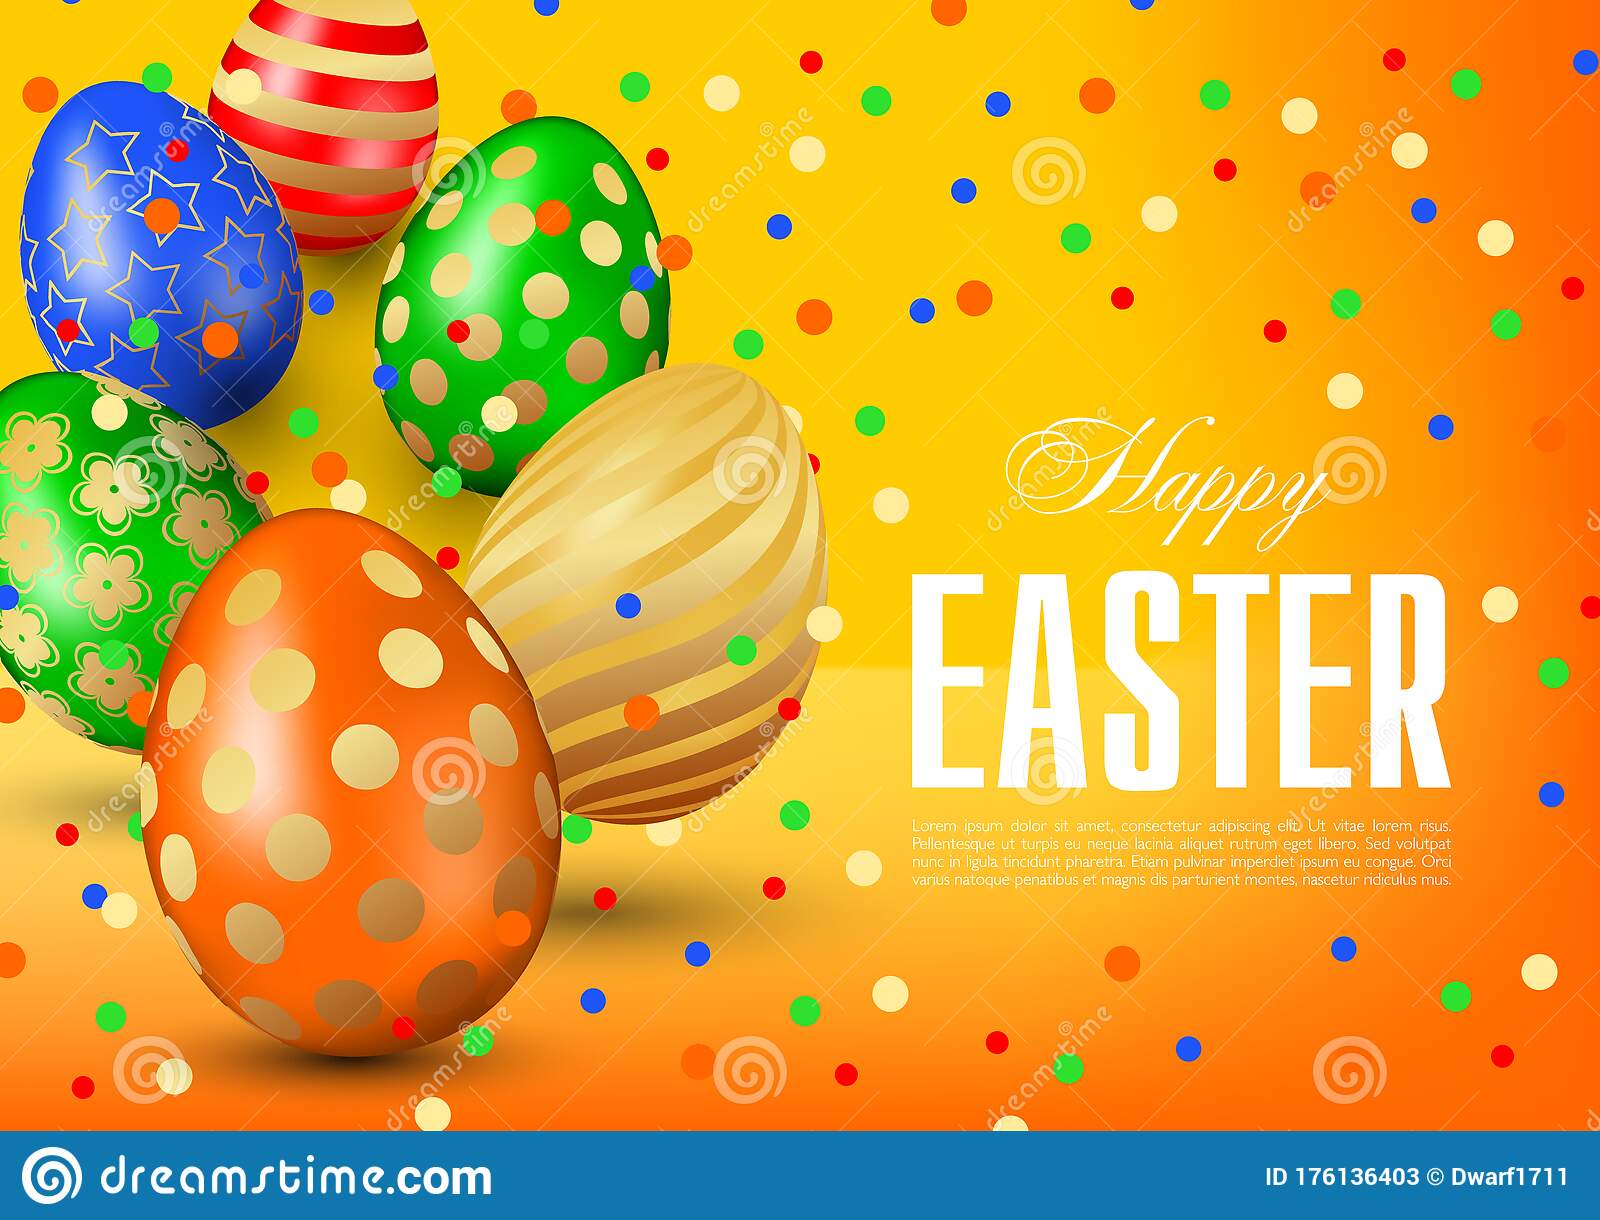 Elegant Happy Easter greeting card, flyer, poster or banner vector template with multicolored realistic 3D eggs and confetti on yellow orange background 